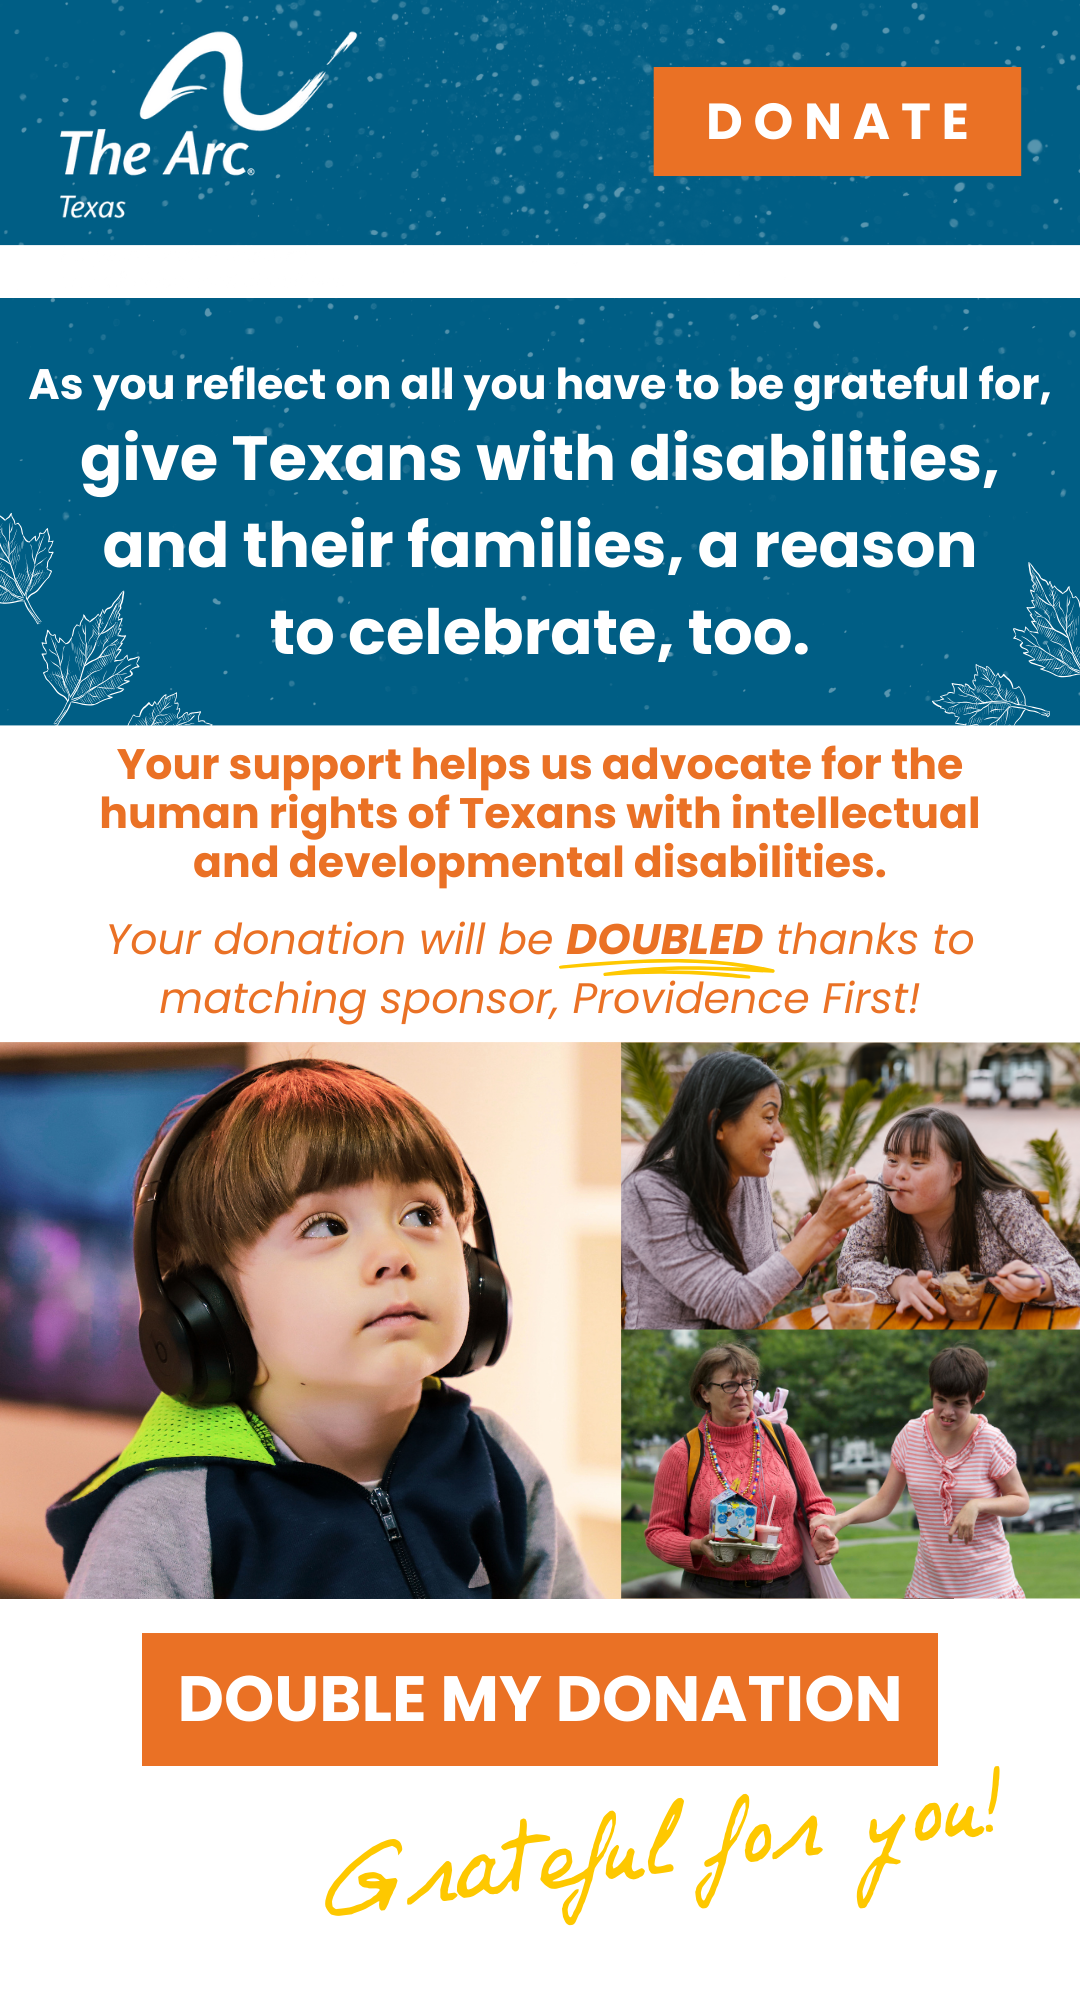 As you reflect on all you have to be grateful for, give Texans with disabilities, and their families, a reason to celebrate, too. Help us protect and advocate for the human rights of Texans with intellectual and developmental disabilities. Your donation will be DOUBLED thanks to matching sponsor, Providence First! Grateful for
you! The image contains photos of a little boy wearing headphones, a mom eating ice cream with her daughter who has Down Syndrome, and a mother walking with her daughter who has a disability. There is a button at the bottom of the email that says DOUBLE MY DONATION.